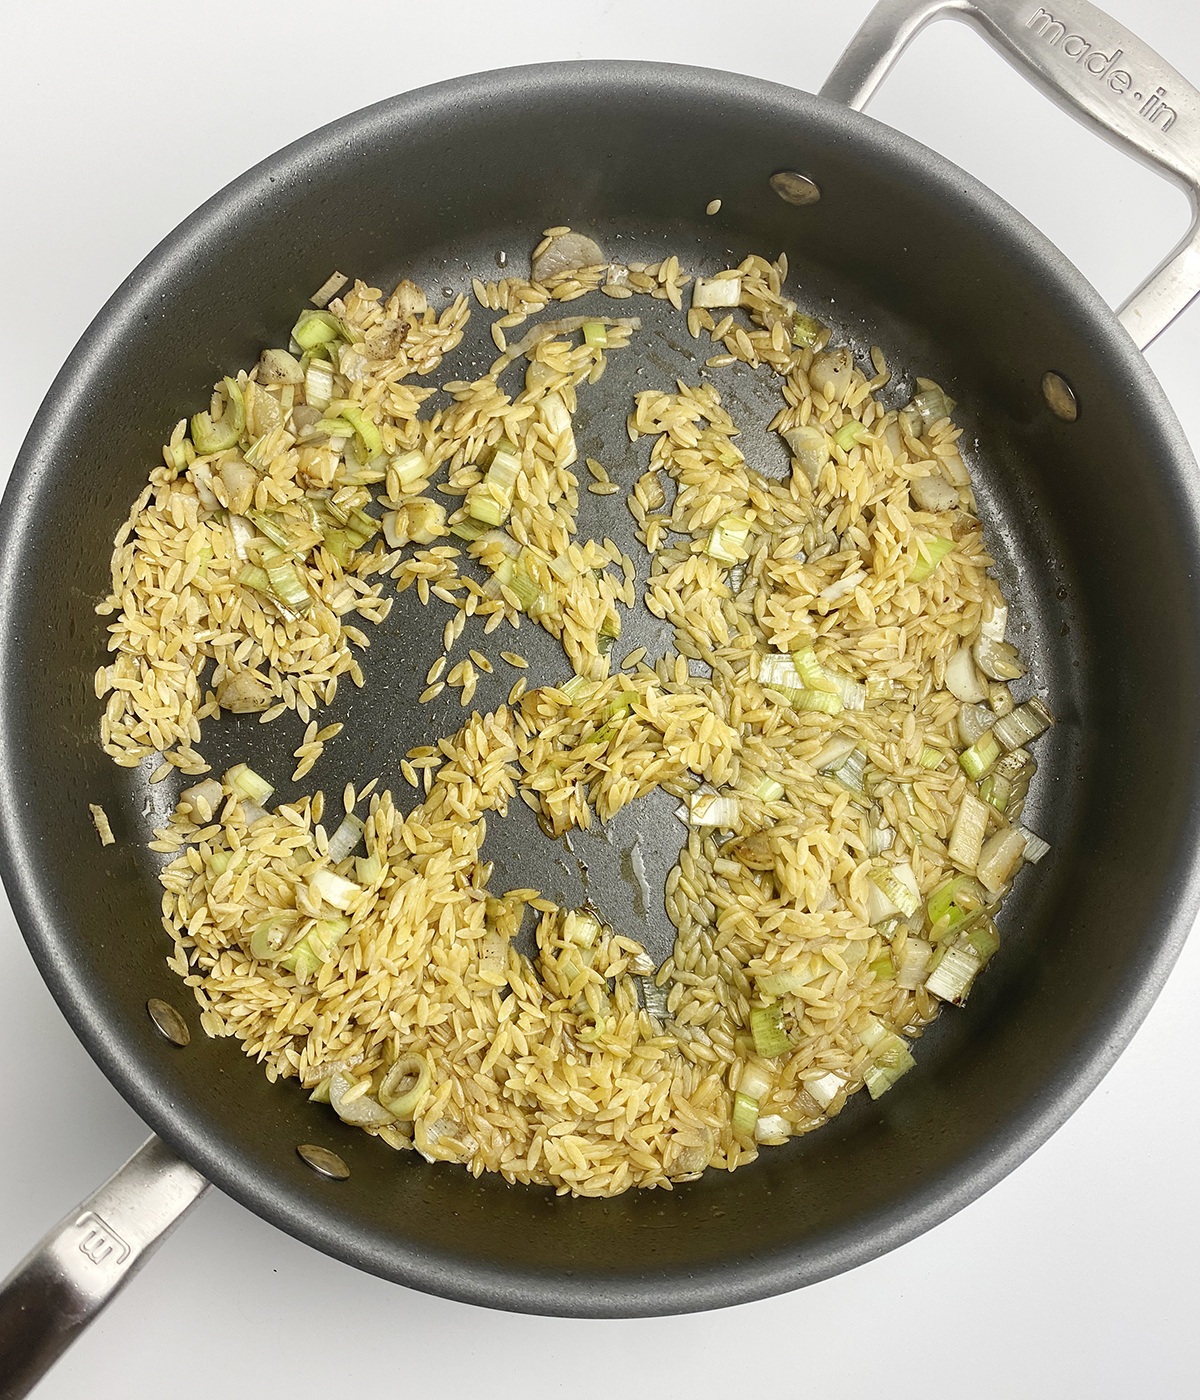 Orzo and leeks and wine cooking in a skillet.